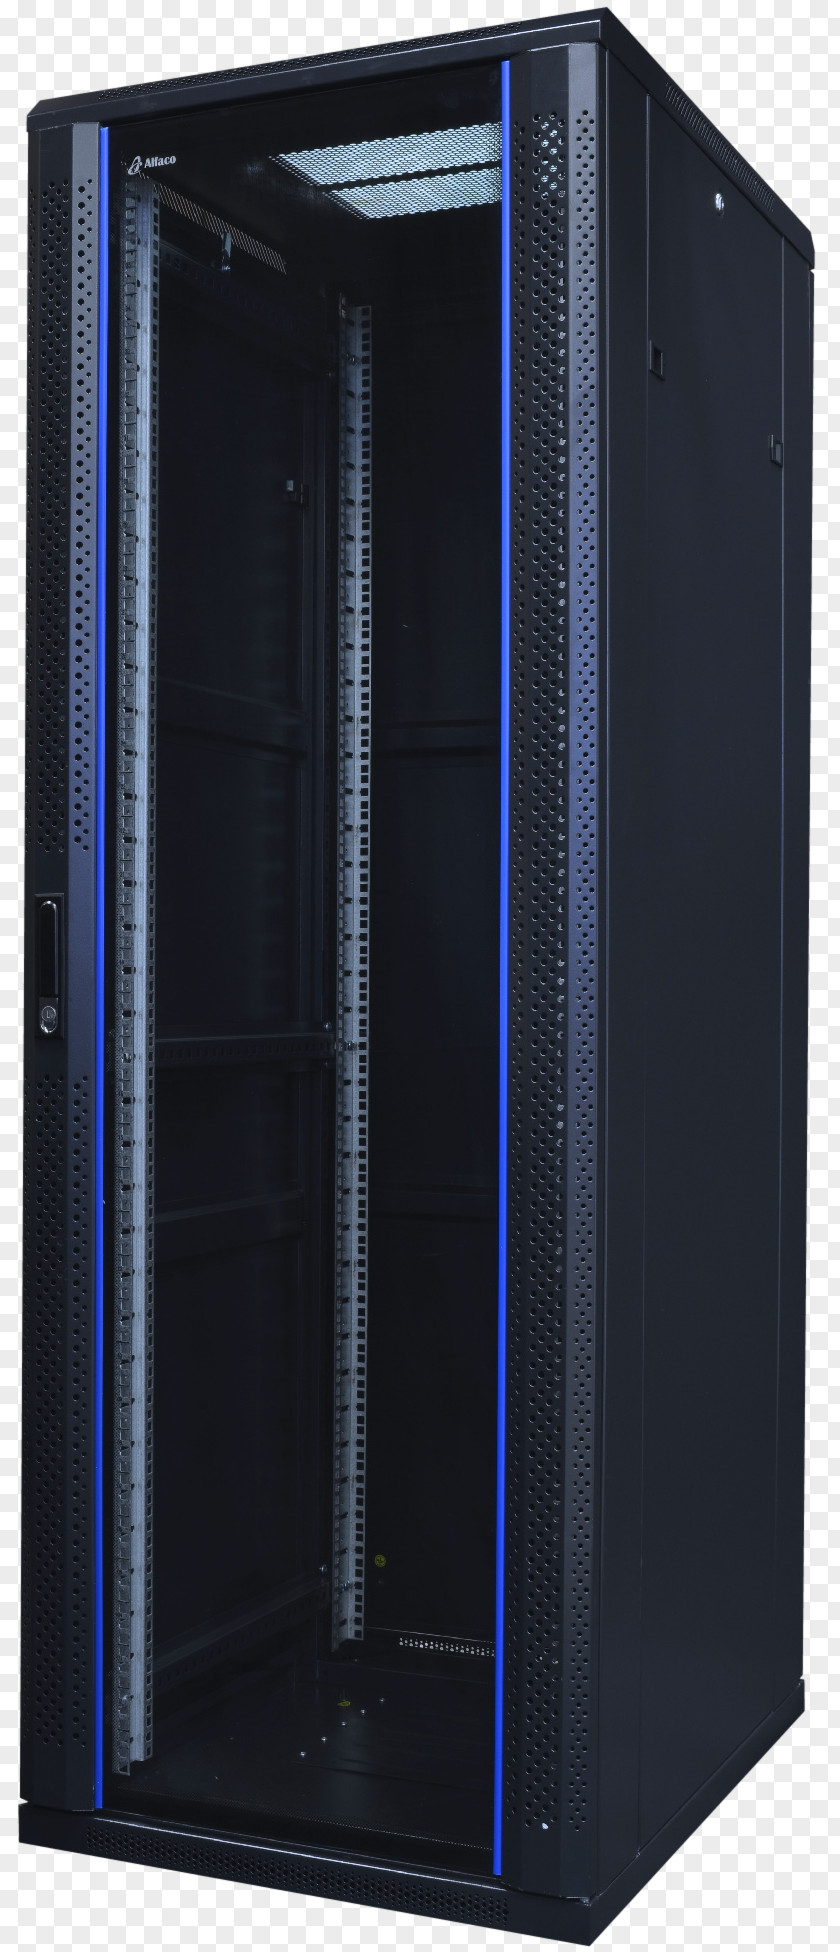 19-inch Rack Computer Cases & Housings Servers PNG